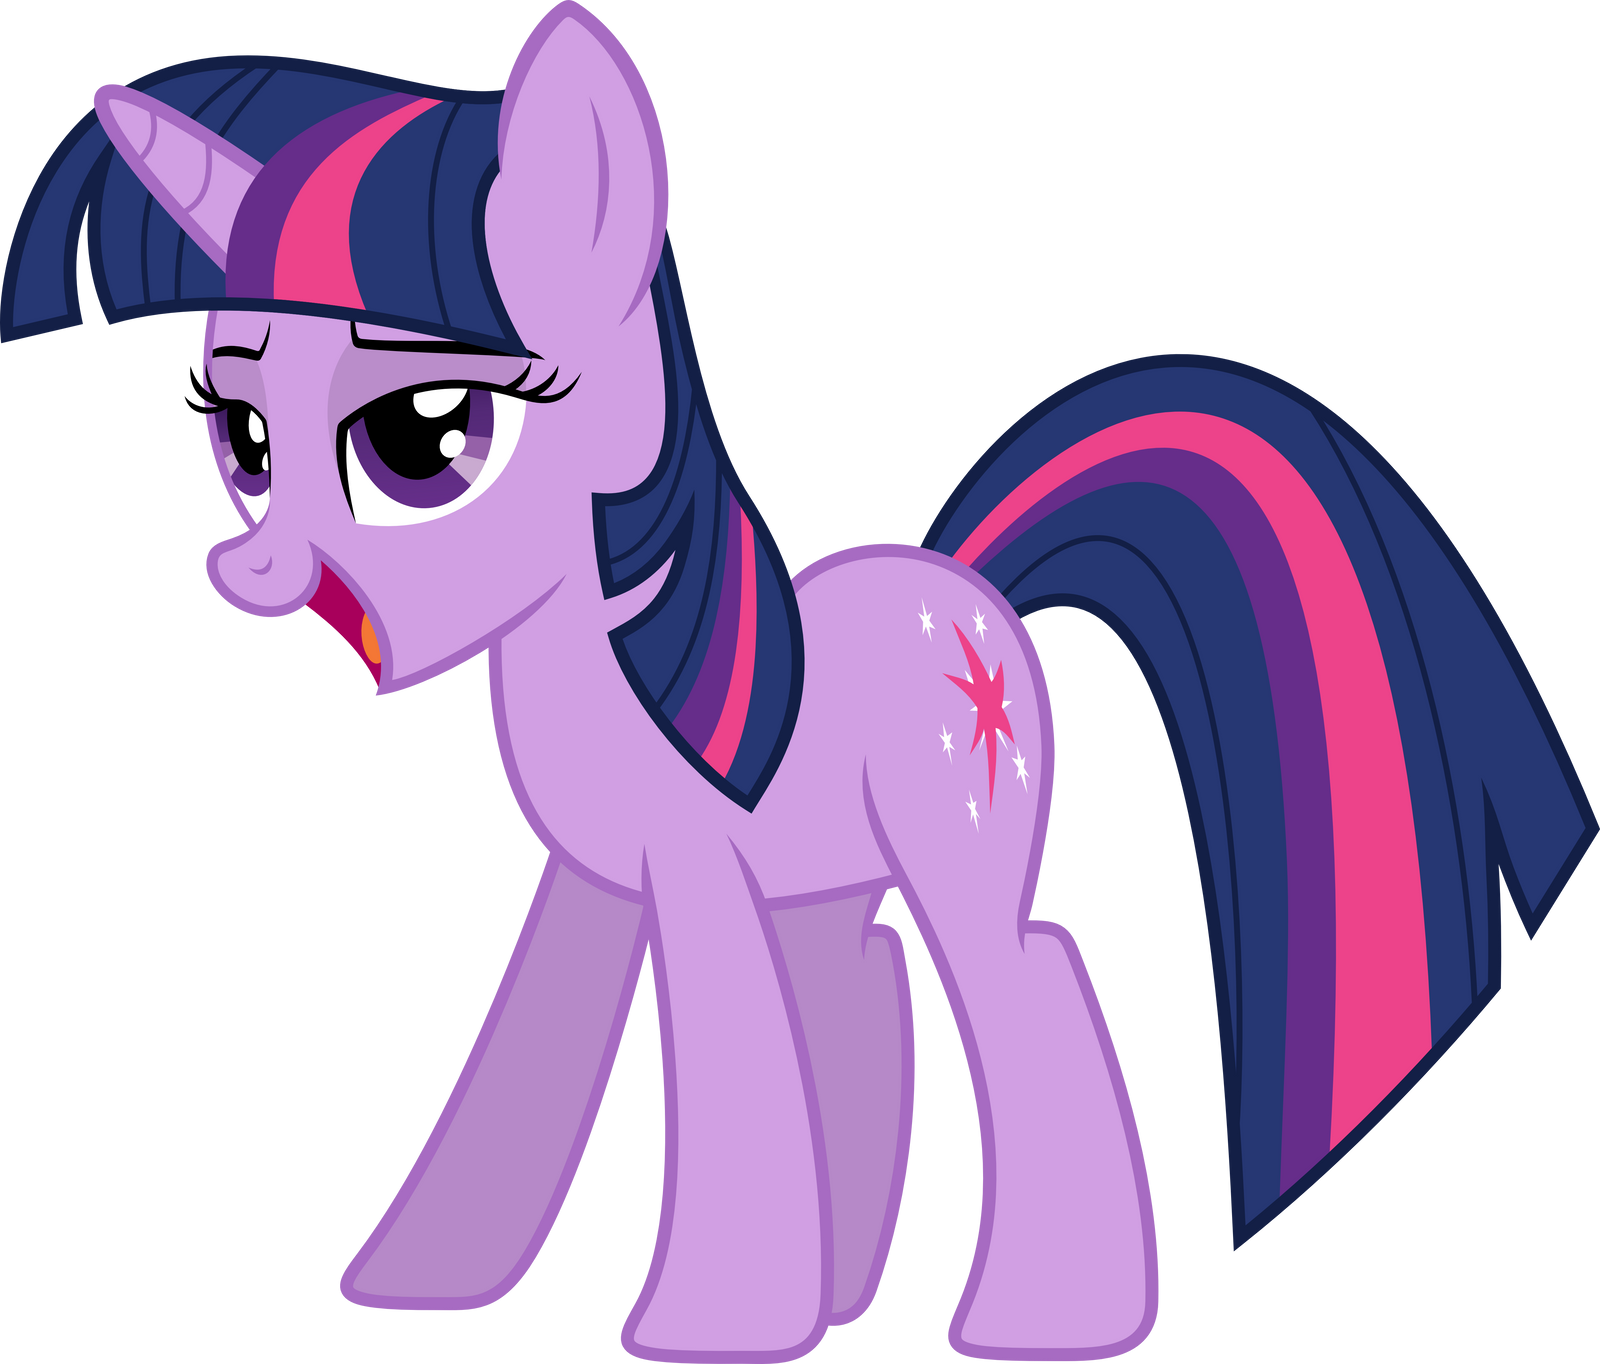 twilight_sparkle_4_by_xpesifeindx-d59rrx2.png